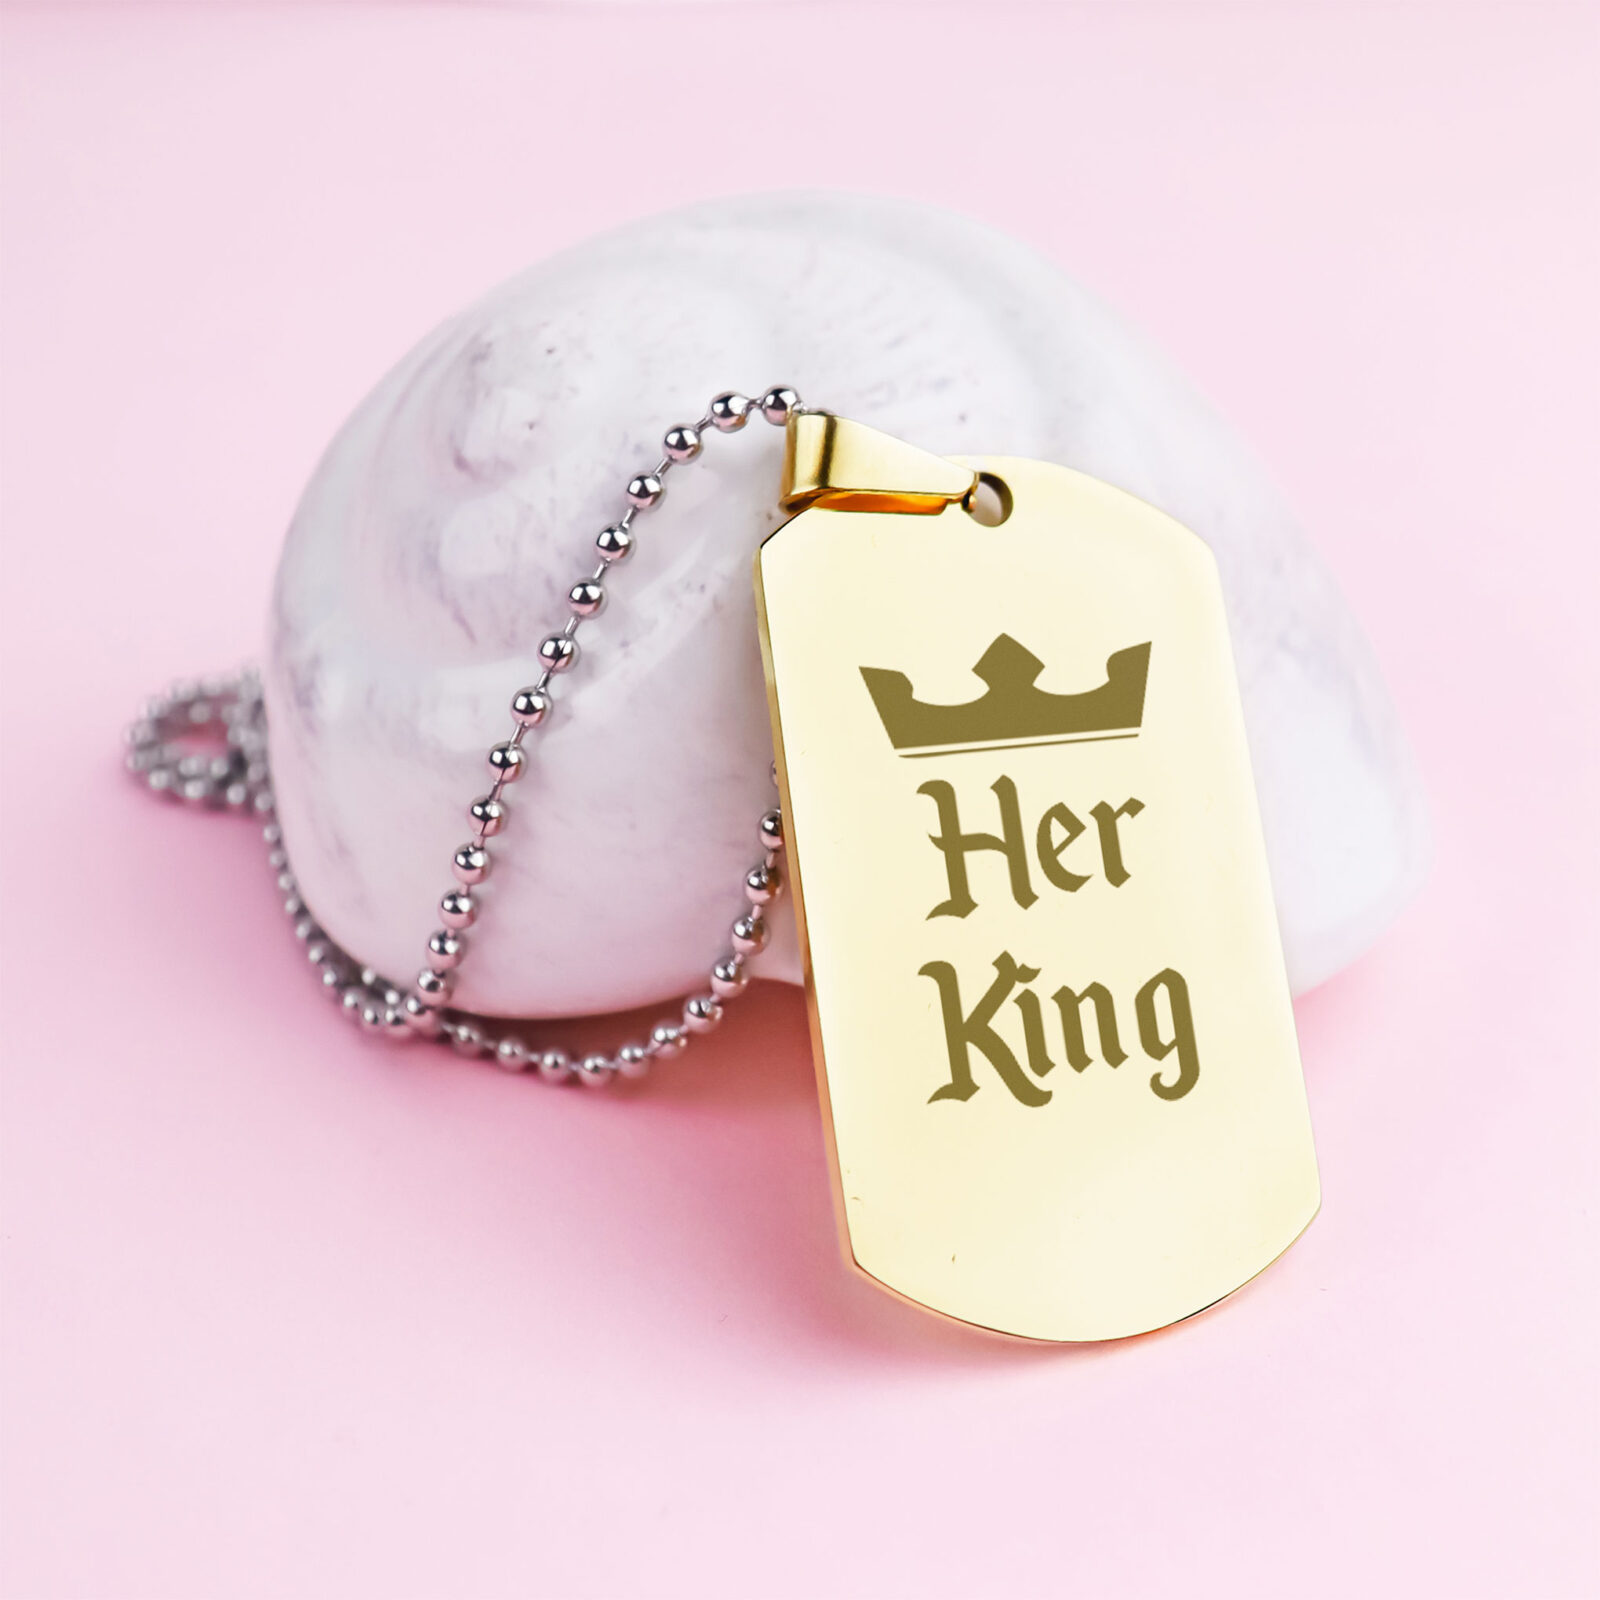 Her King Army Necklace